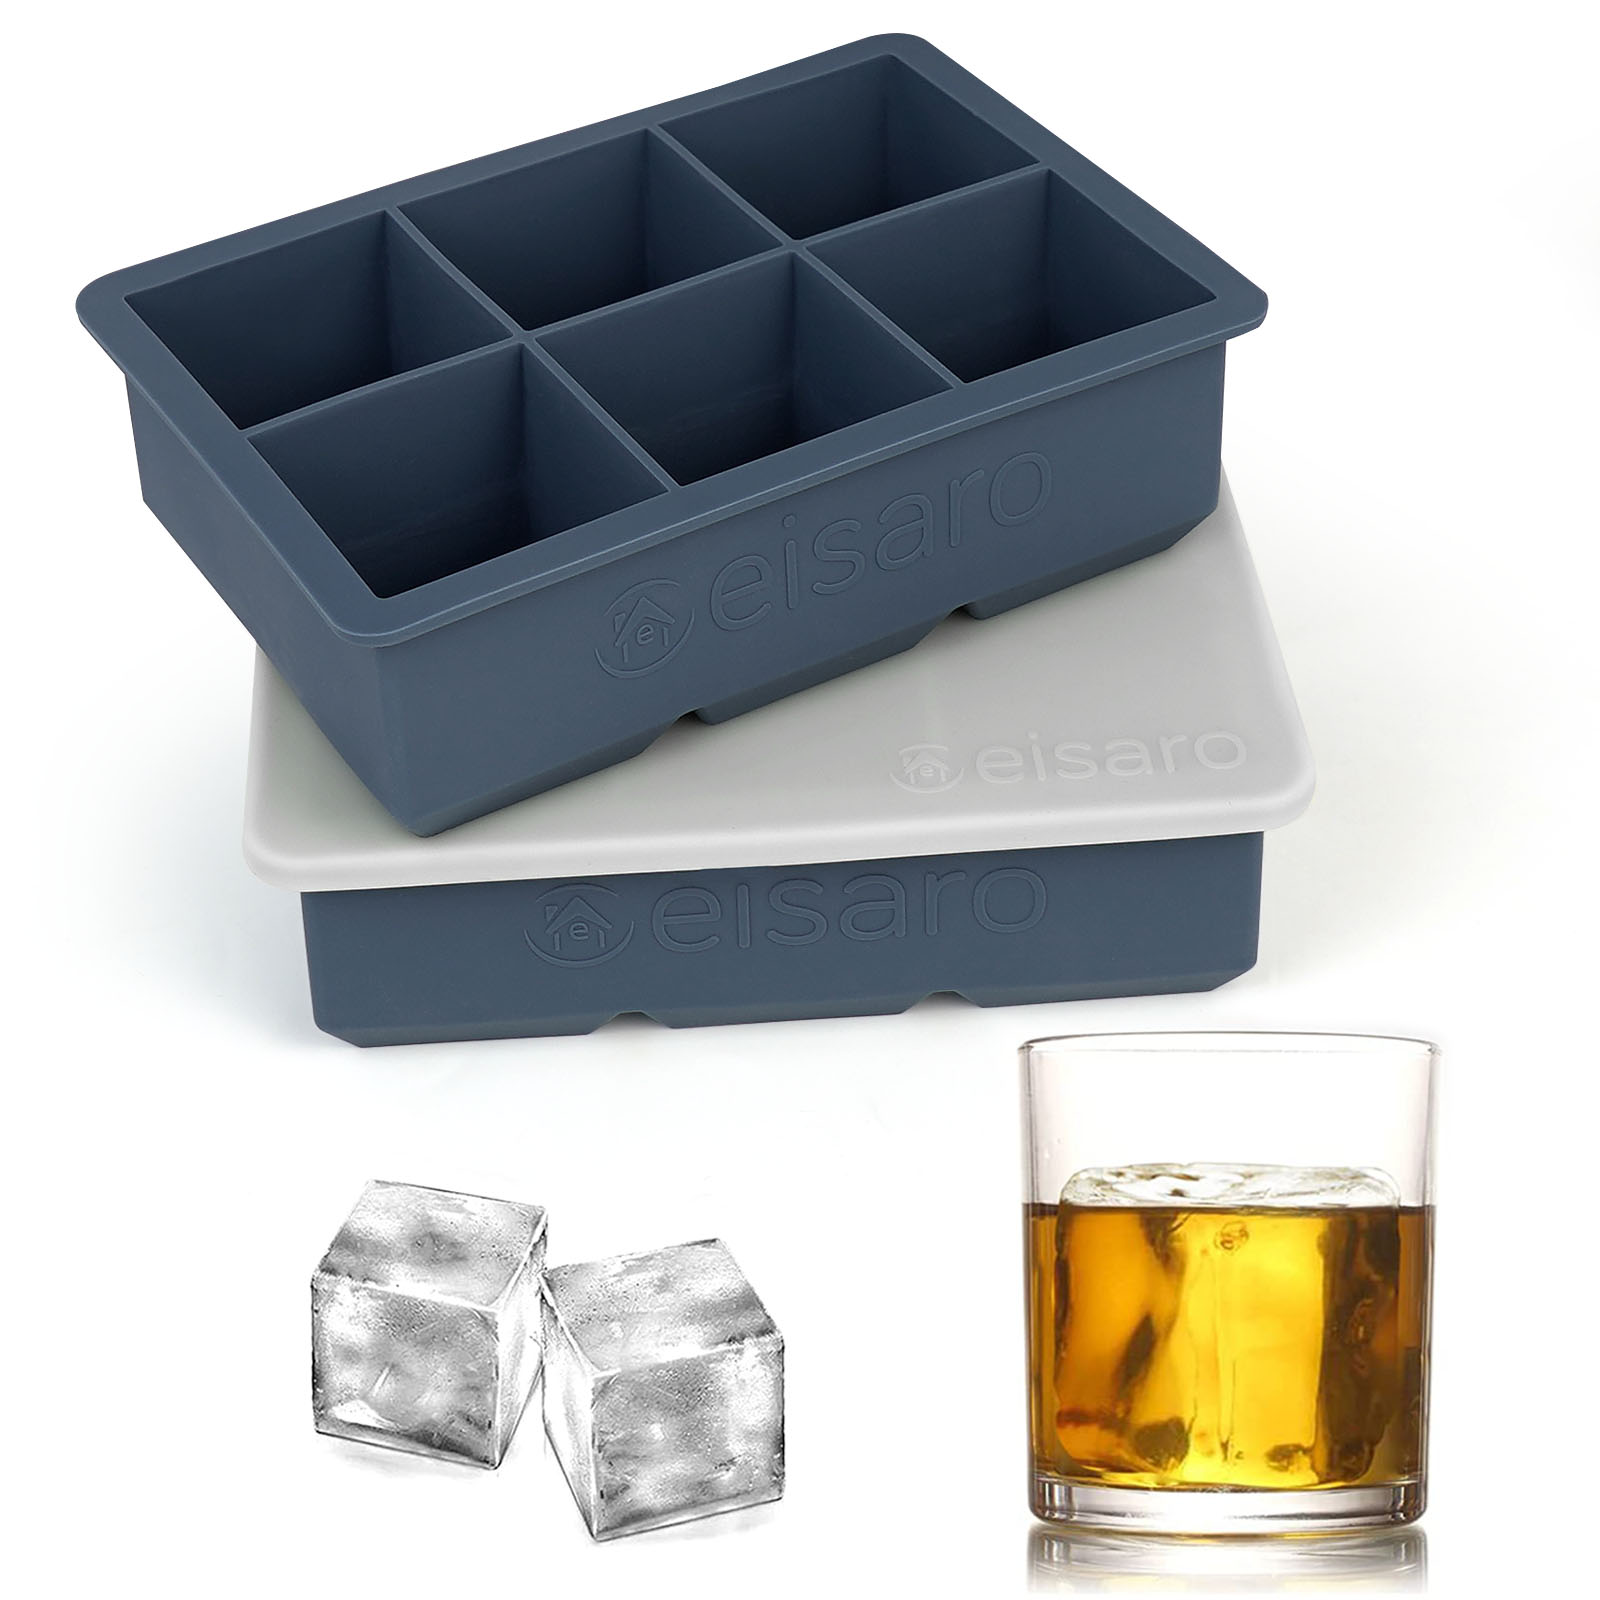 Large Ice Cube Trays, Reusable Silicone 6-ice Cube Molds With